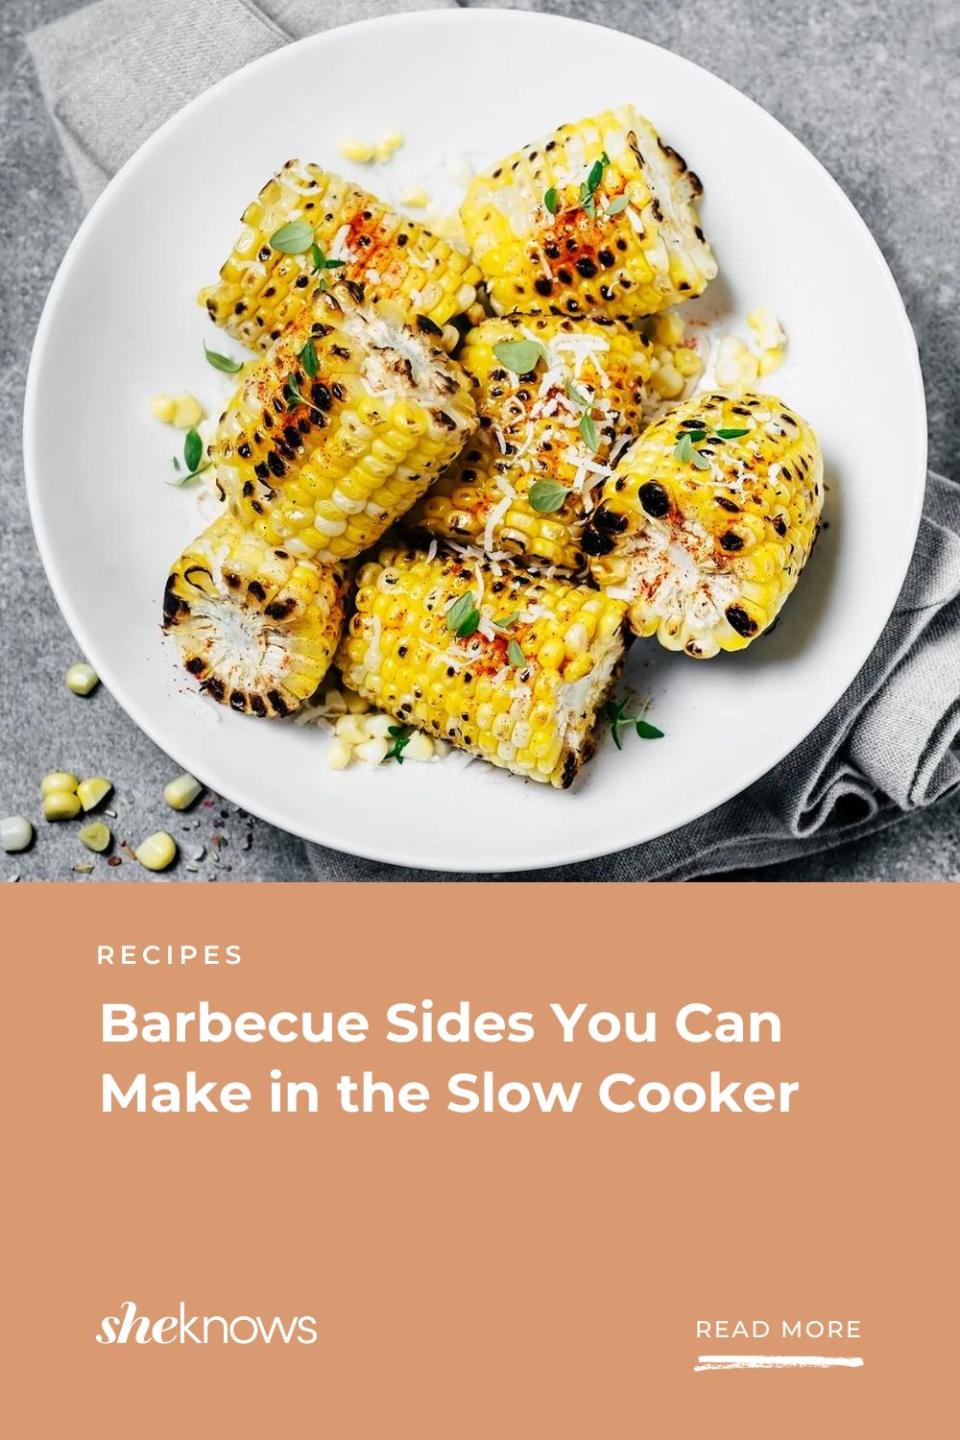 23 Barbecue Sides You Can Make in the Slow Cooker